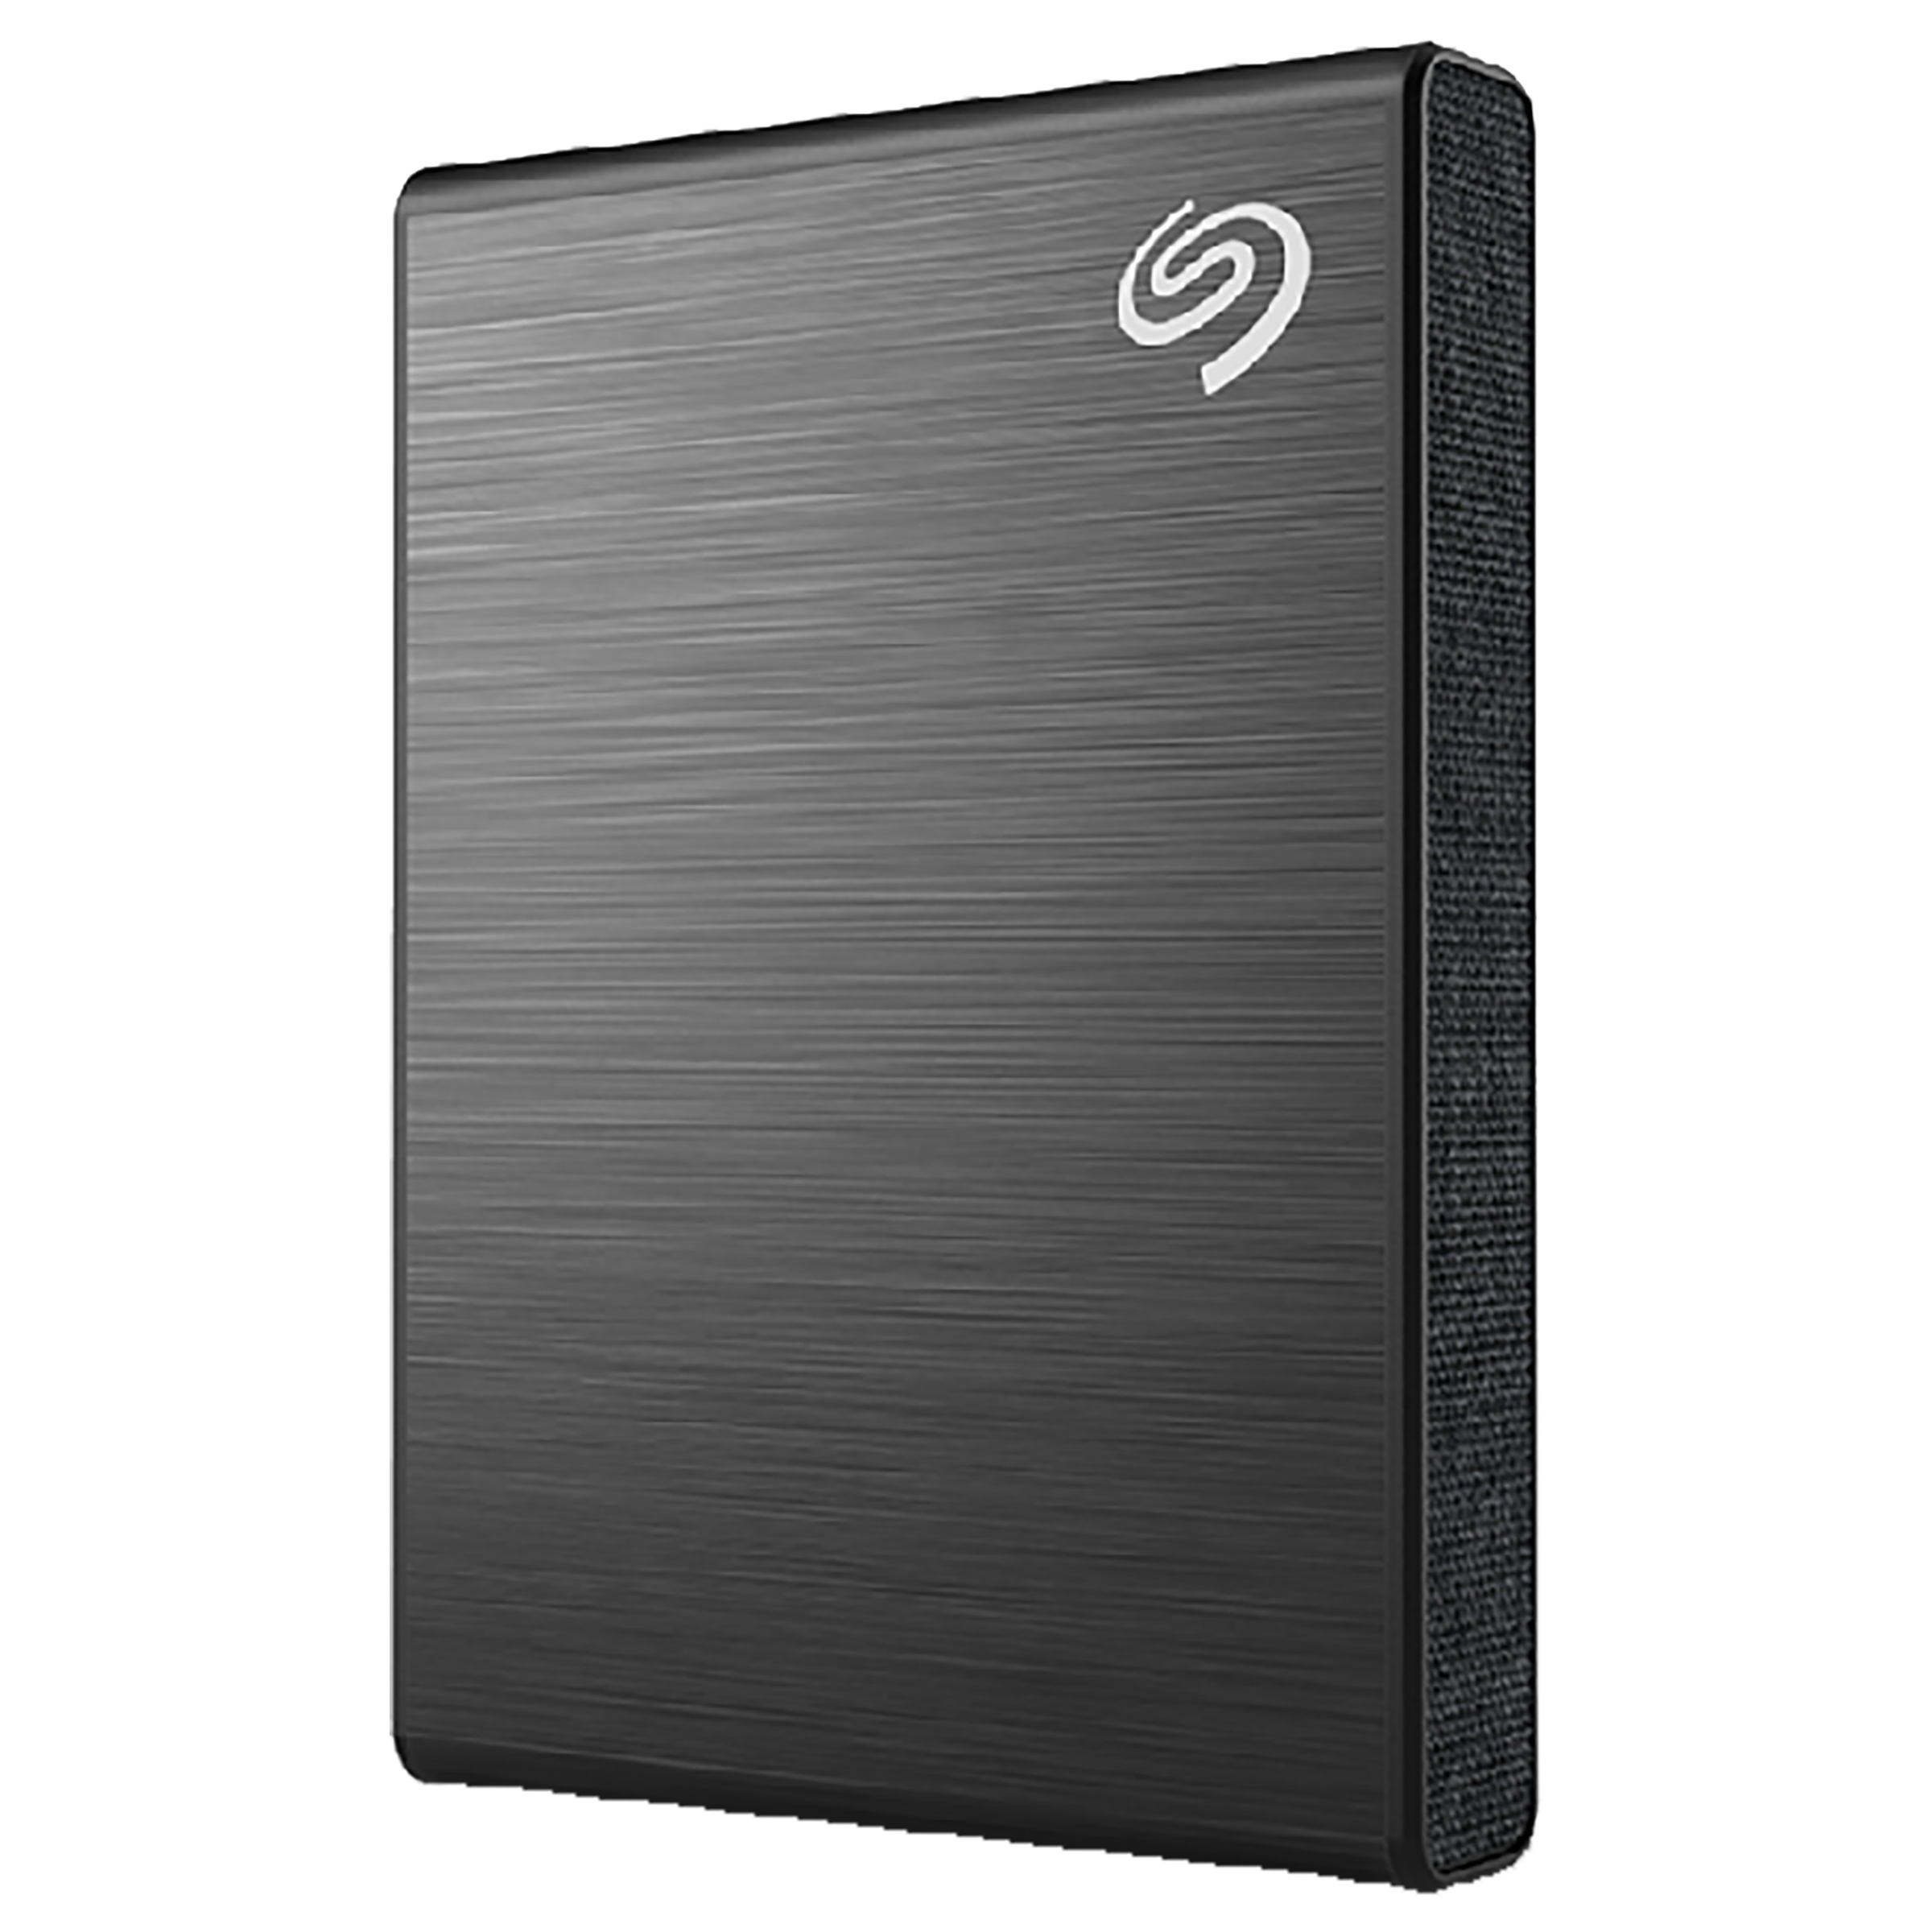 Seagate - Seagate One Touch 1TB USB 3.0 Hard Disk Drive (Advanced Password Protection, STKY1000400, Black)